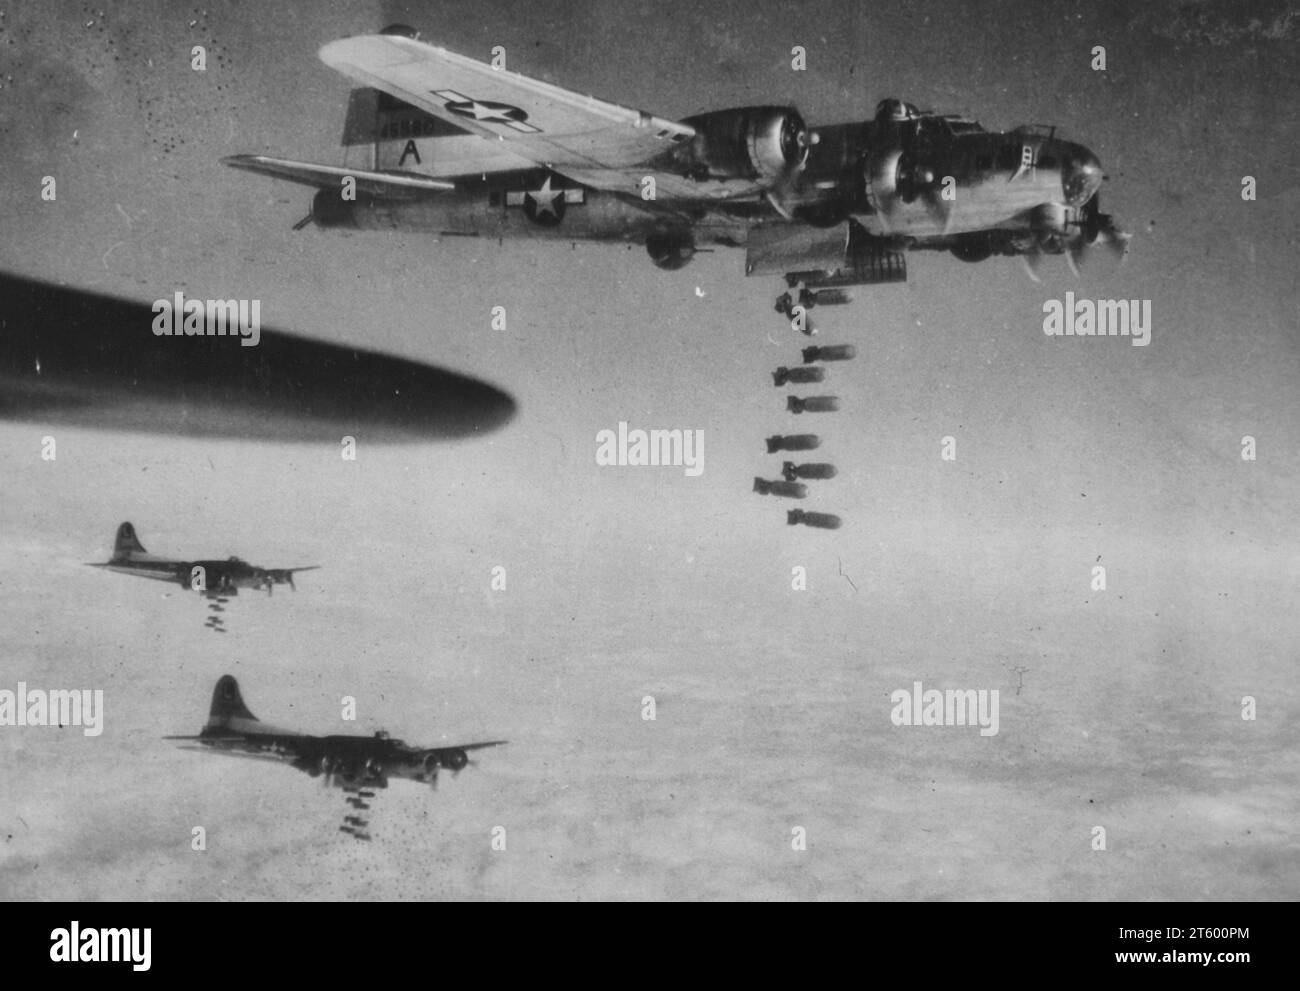 Boeing B-17 Flying Fortresses of the U.S. 8th Air Force's Third Air Division bomb German communications at Chemnitz marshalling yard, Germany, near Dresden on Feb 6, 1945. Cutting of rail lines here aided in shutting off the flow of supplies Stock Photo